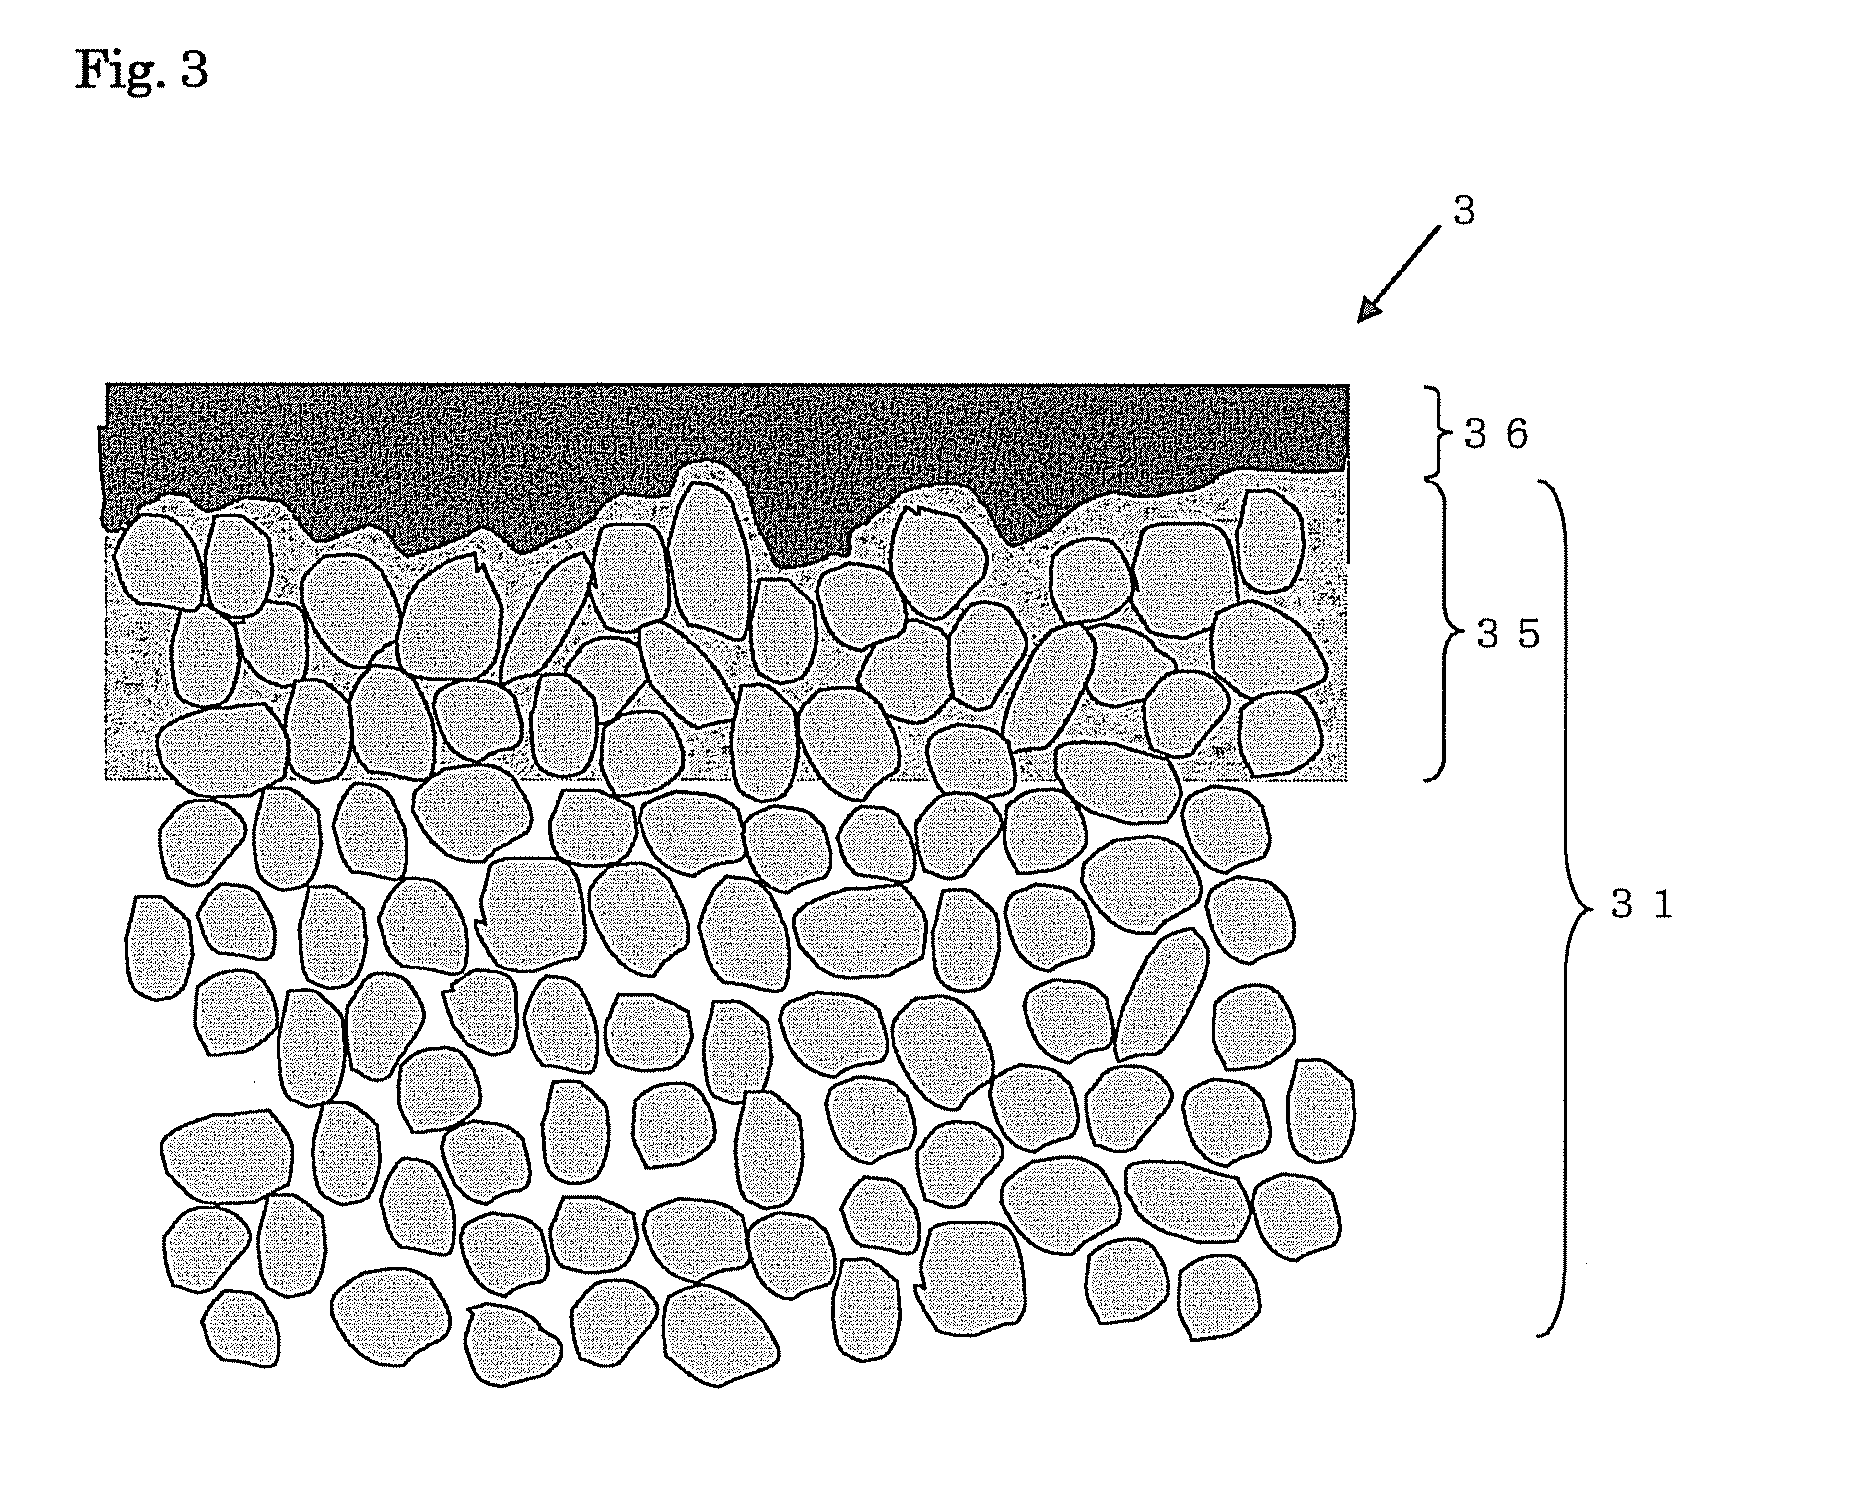 Separation membrane complex, and method for manufacturing the separation membrane complex